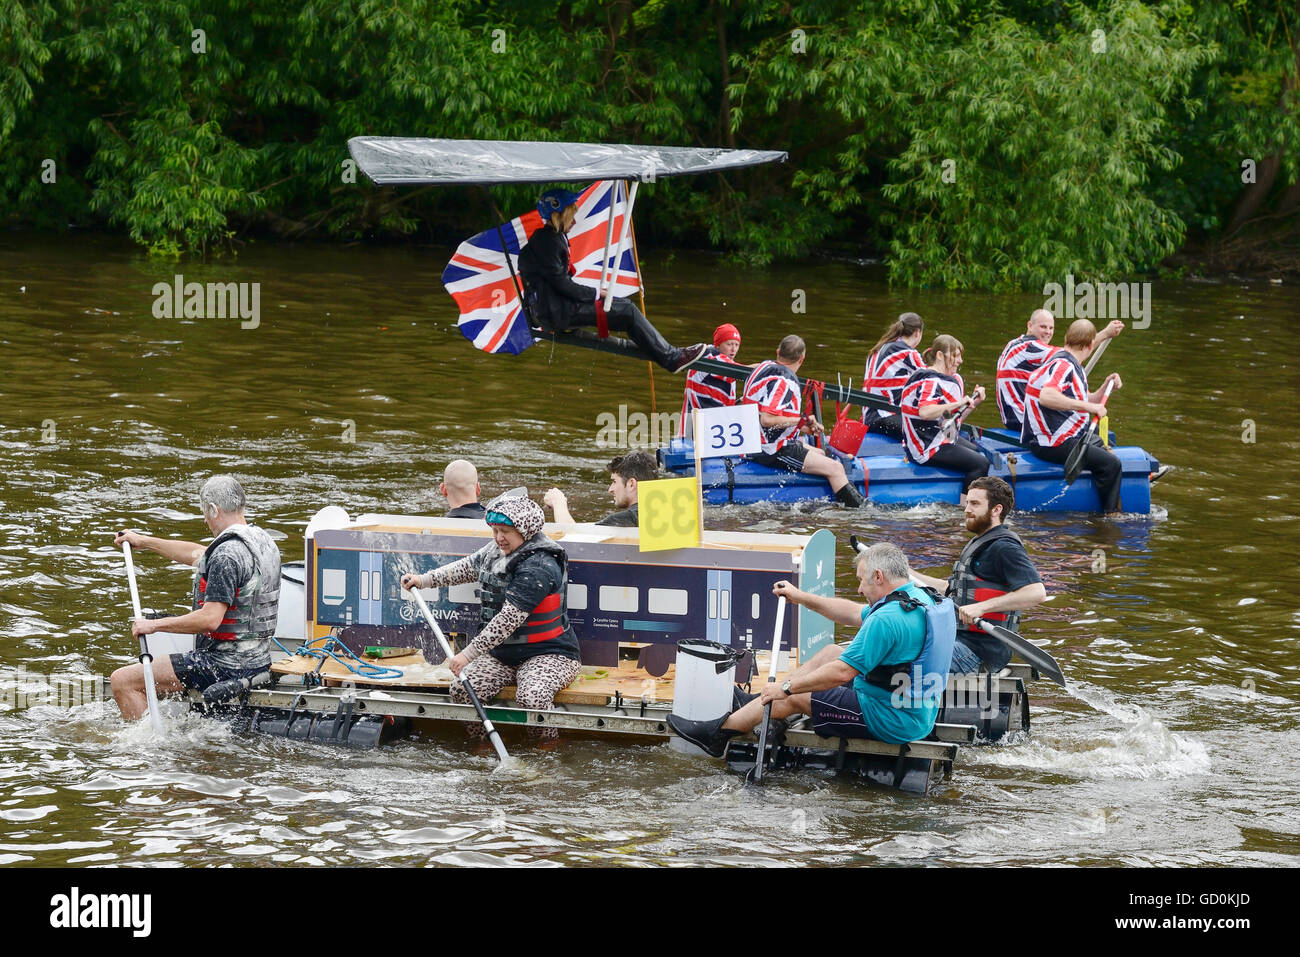 Chester, UK. 10th July 2016. The annual Charity Raft Race on the River Dee organised by Chester Rotary Club. Stock Photo